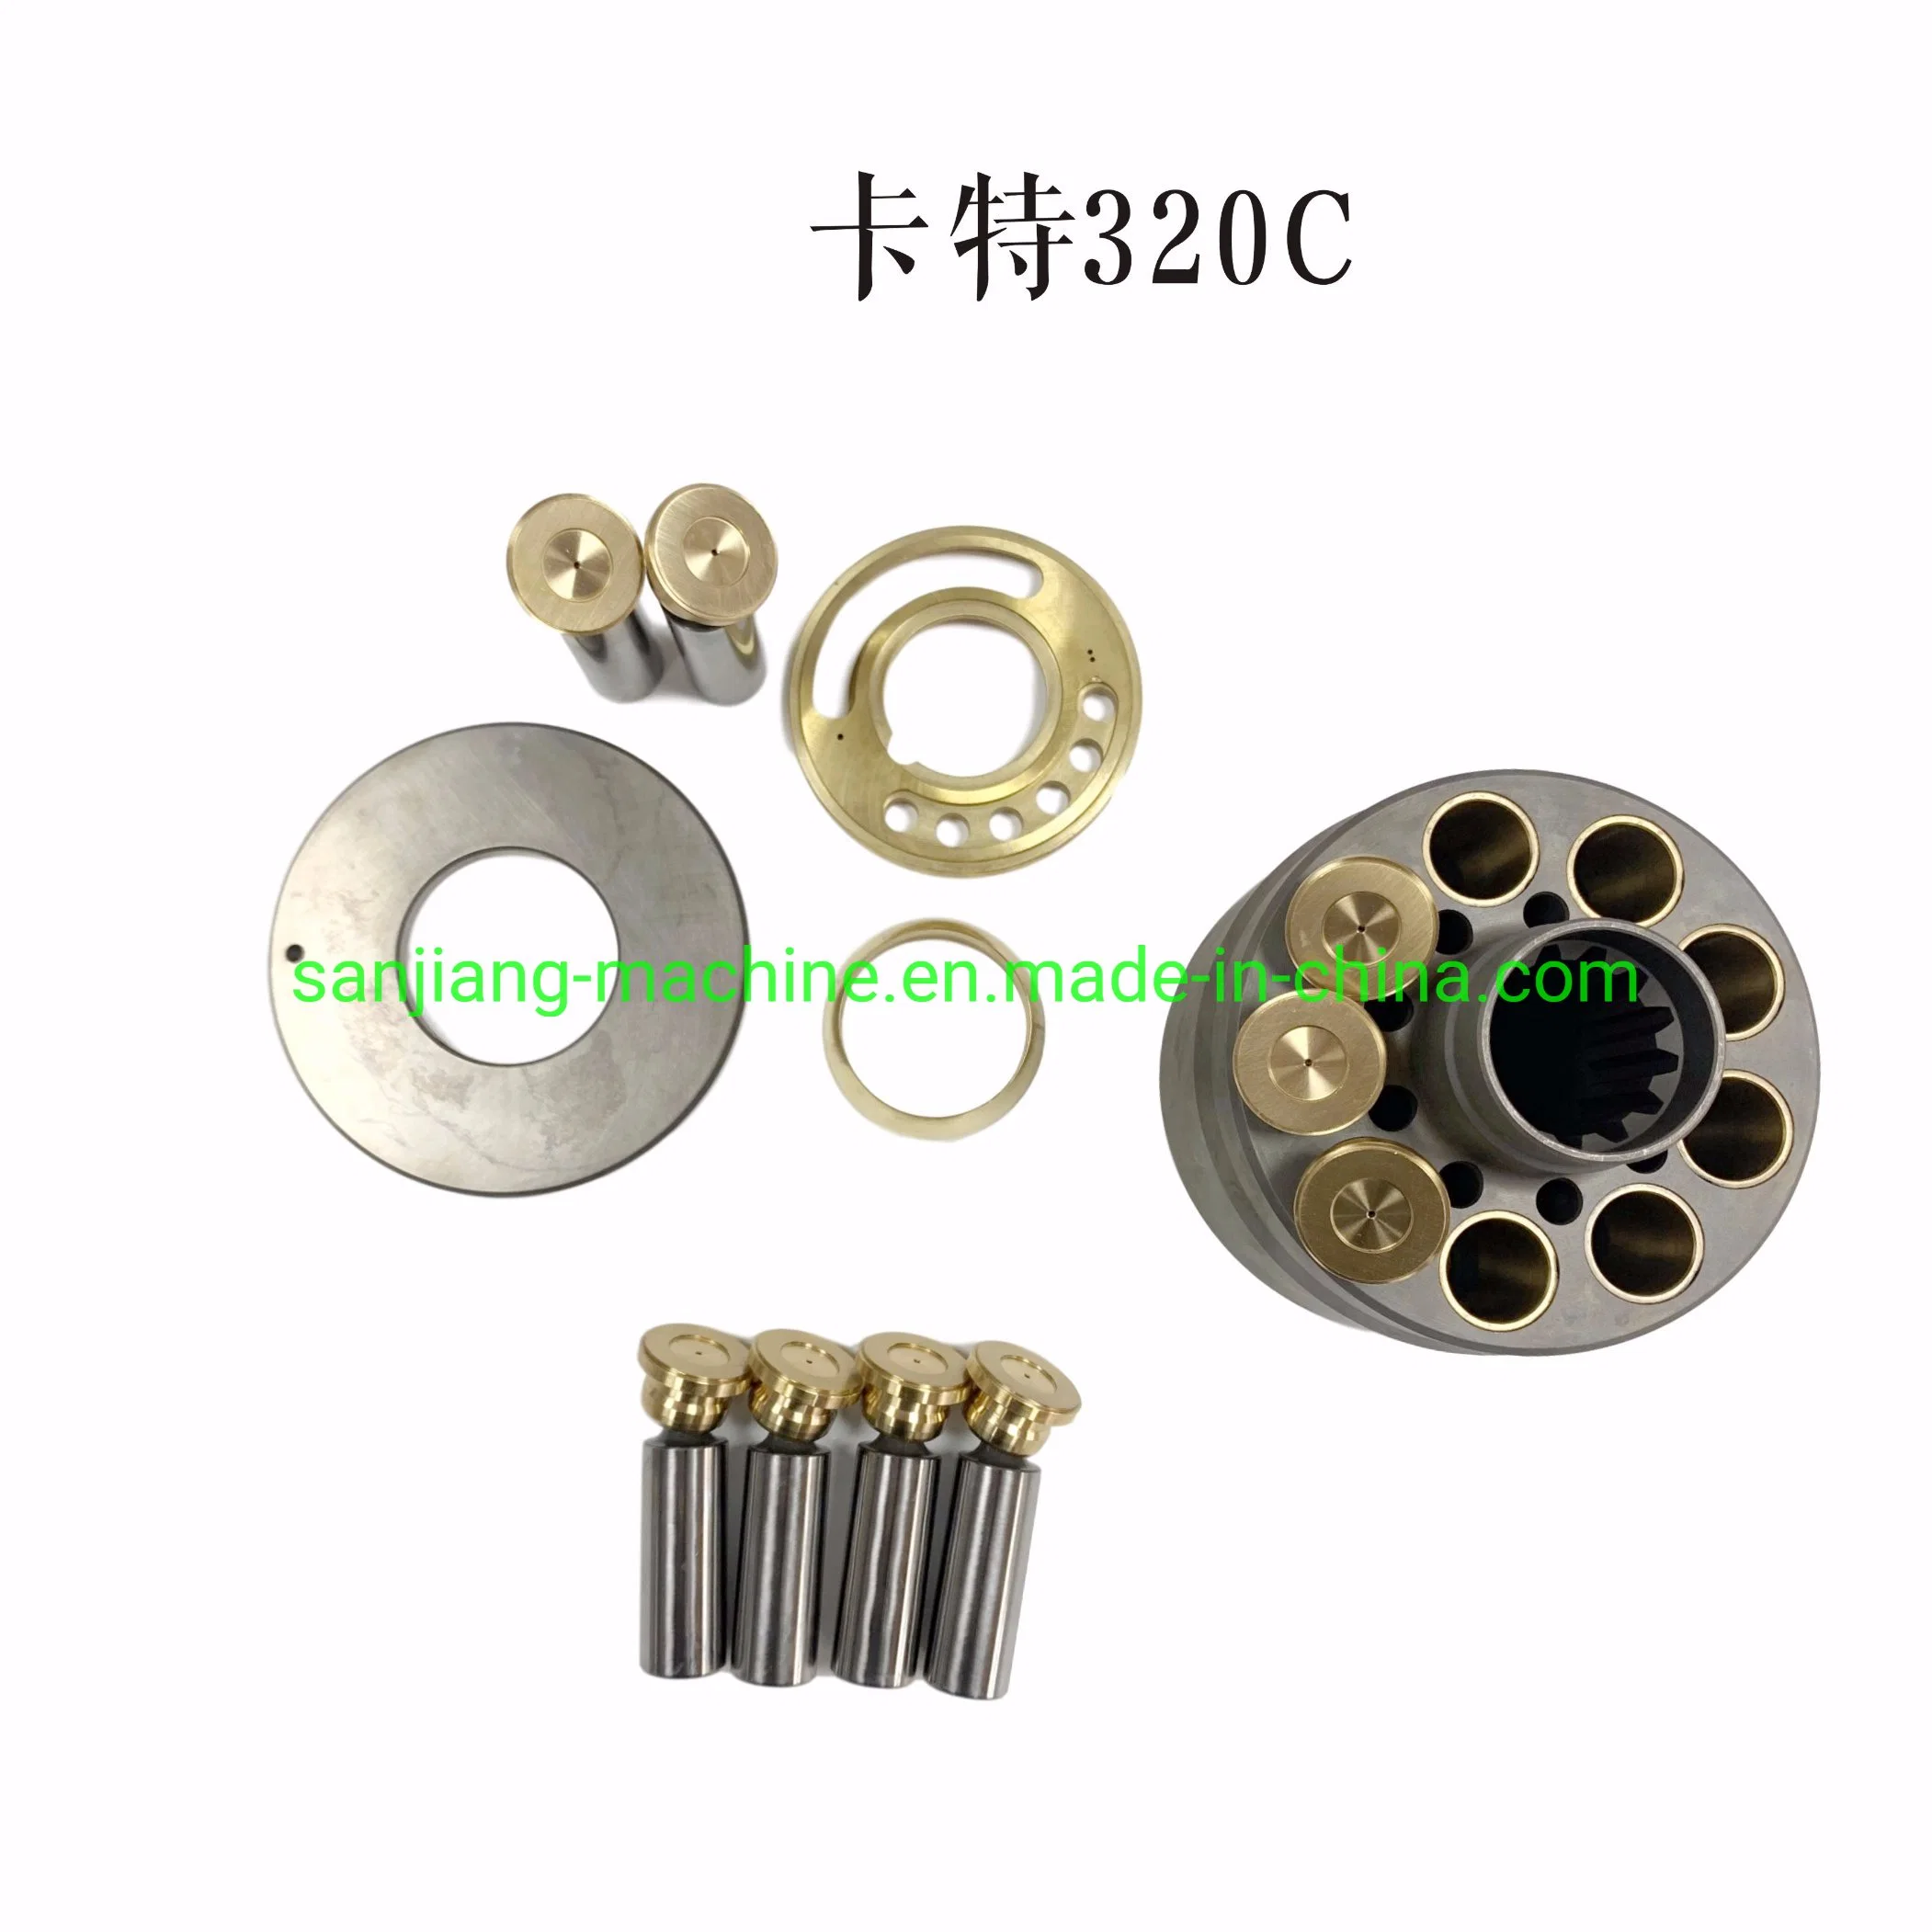 8431499900 E320c Construction Equipment High quality/High cost performance Hydraulic Part Excavator Accessories